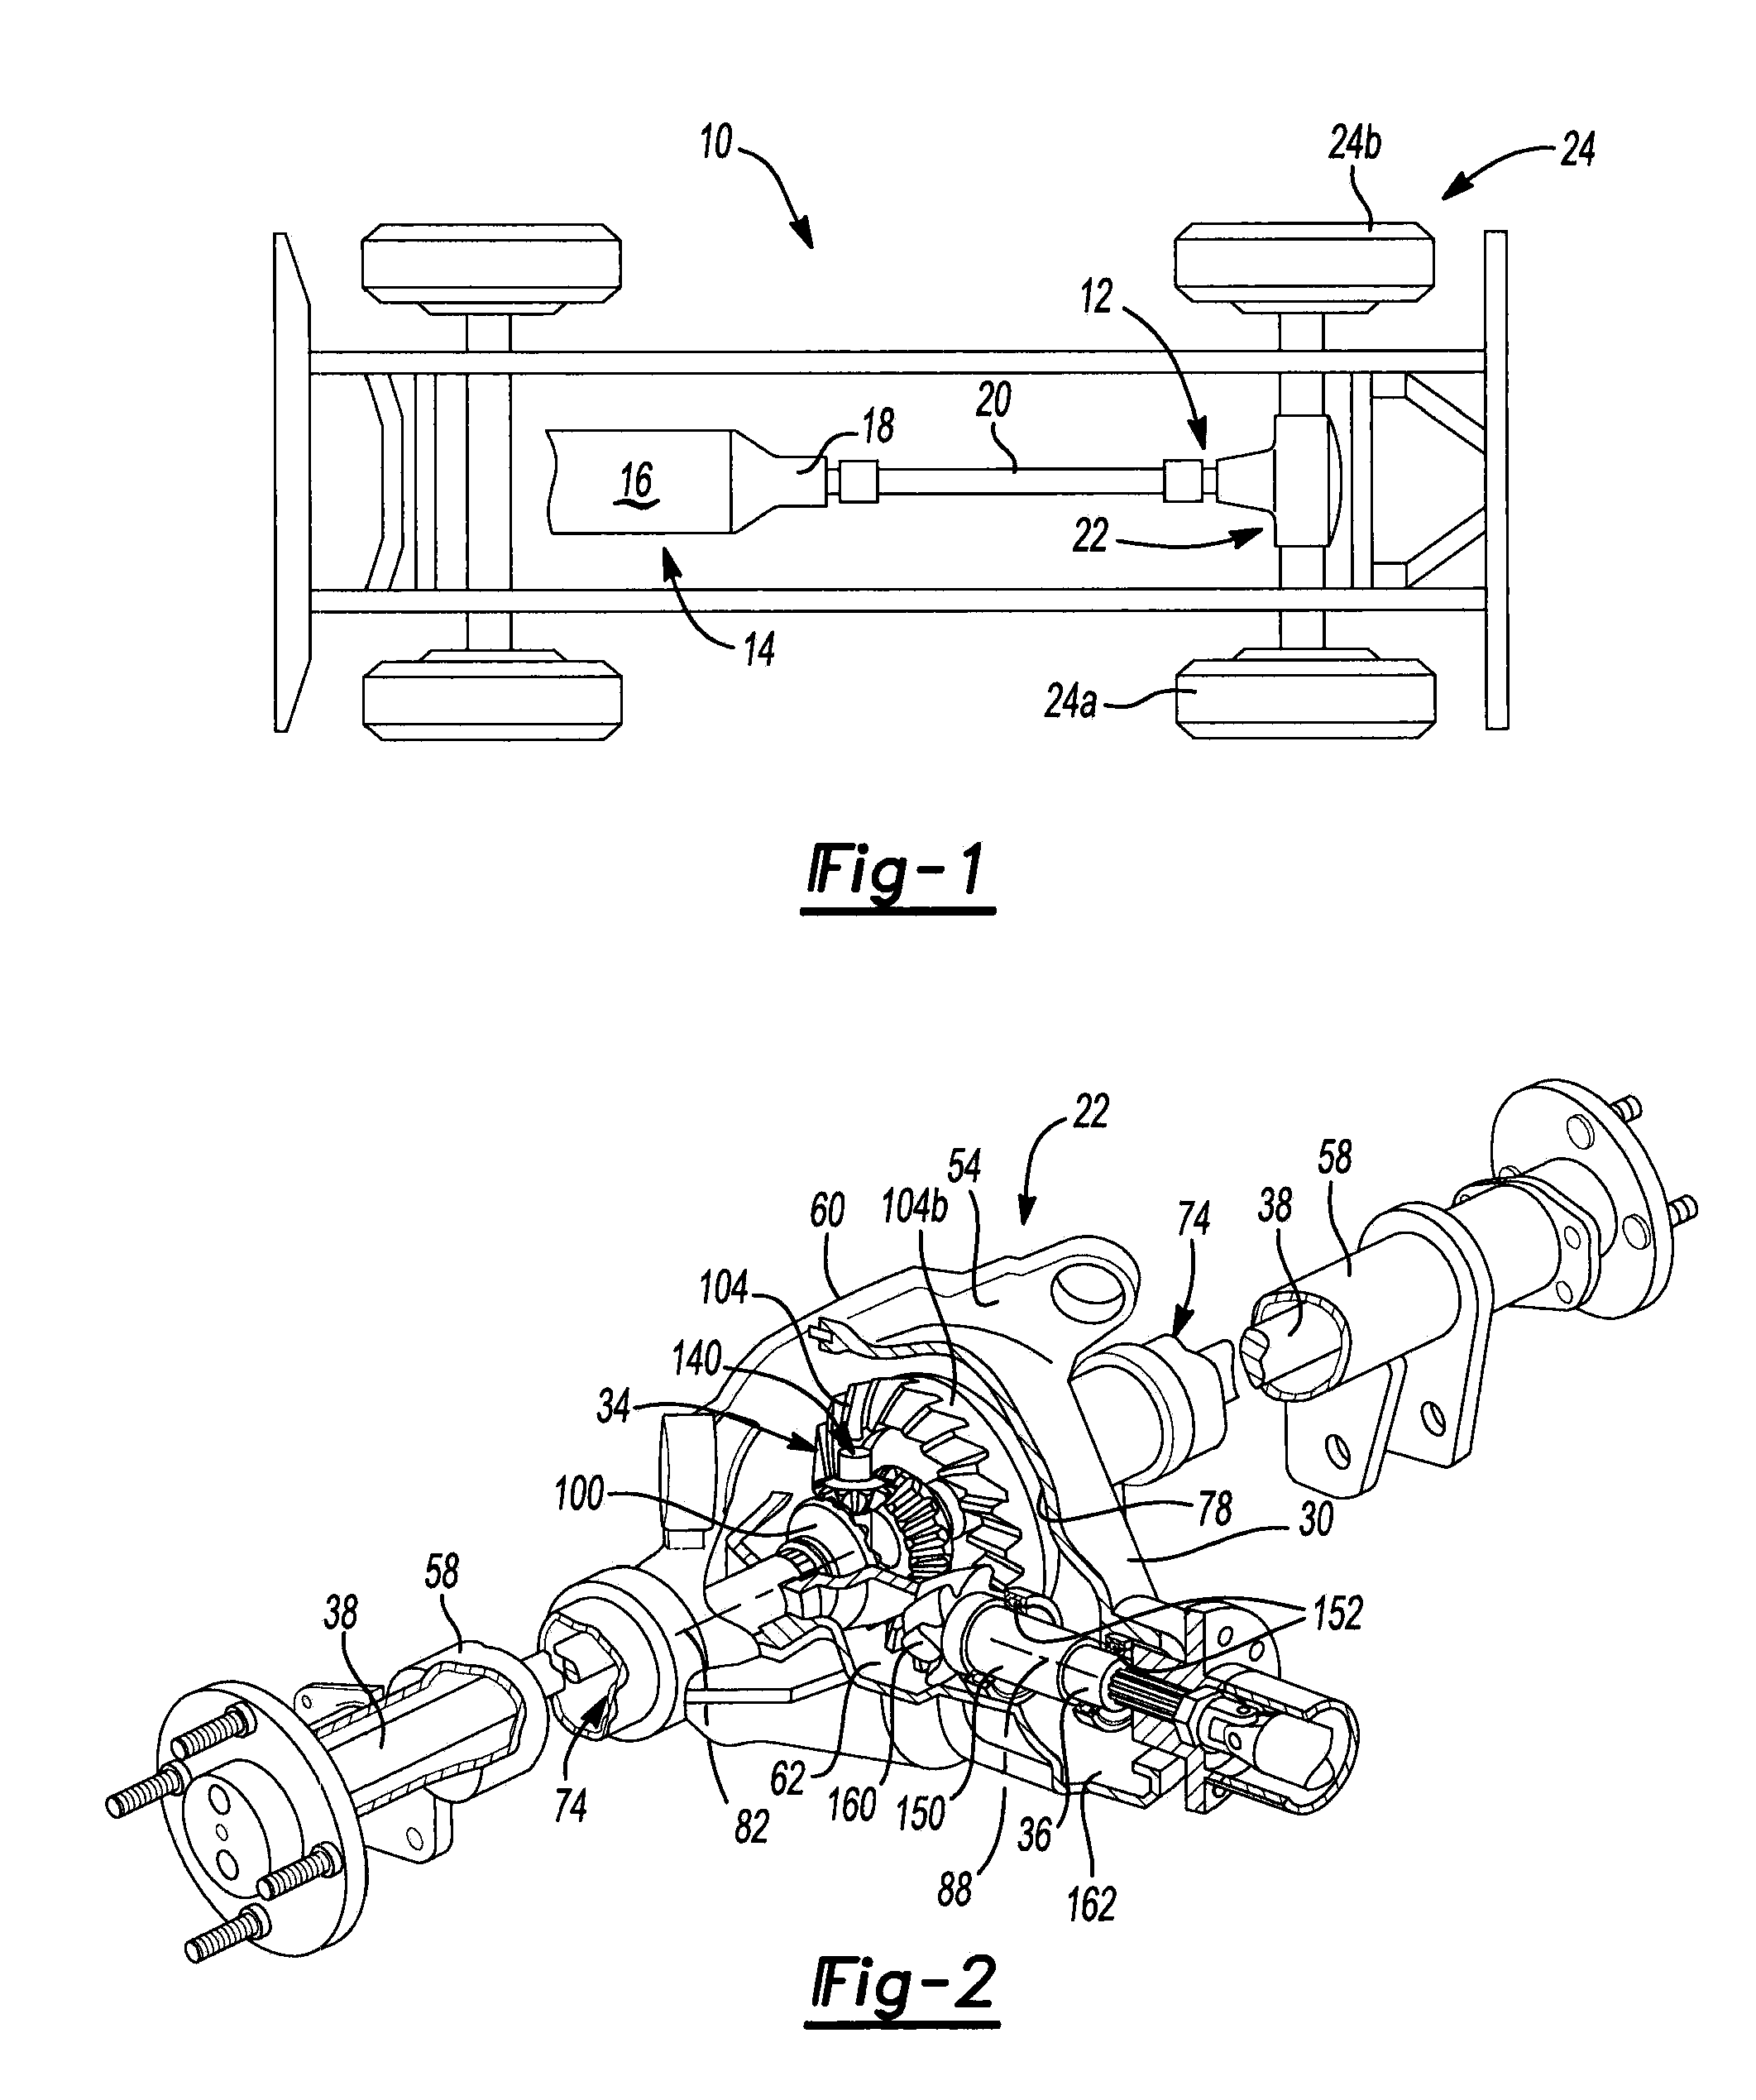 Drive axle assembly with gear mesh lubrication systems for lubricating gear mesh and/or differential bearings